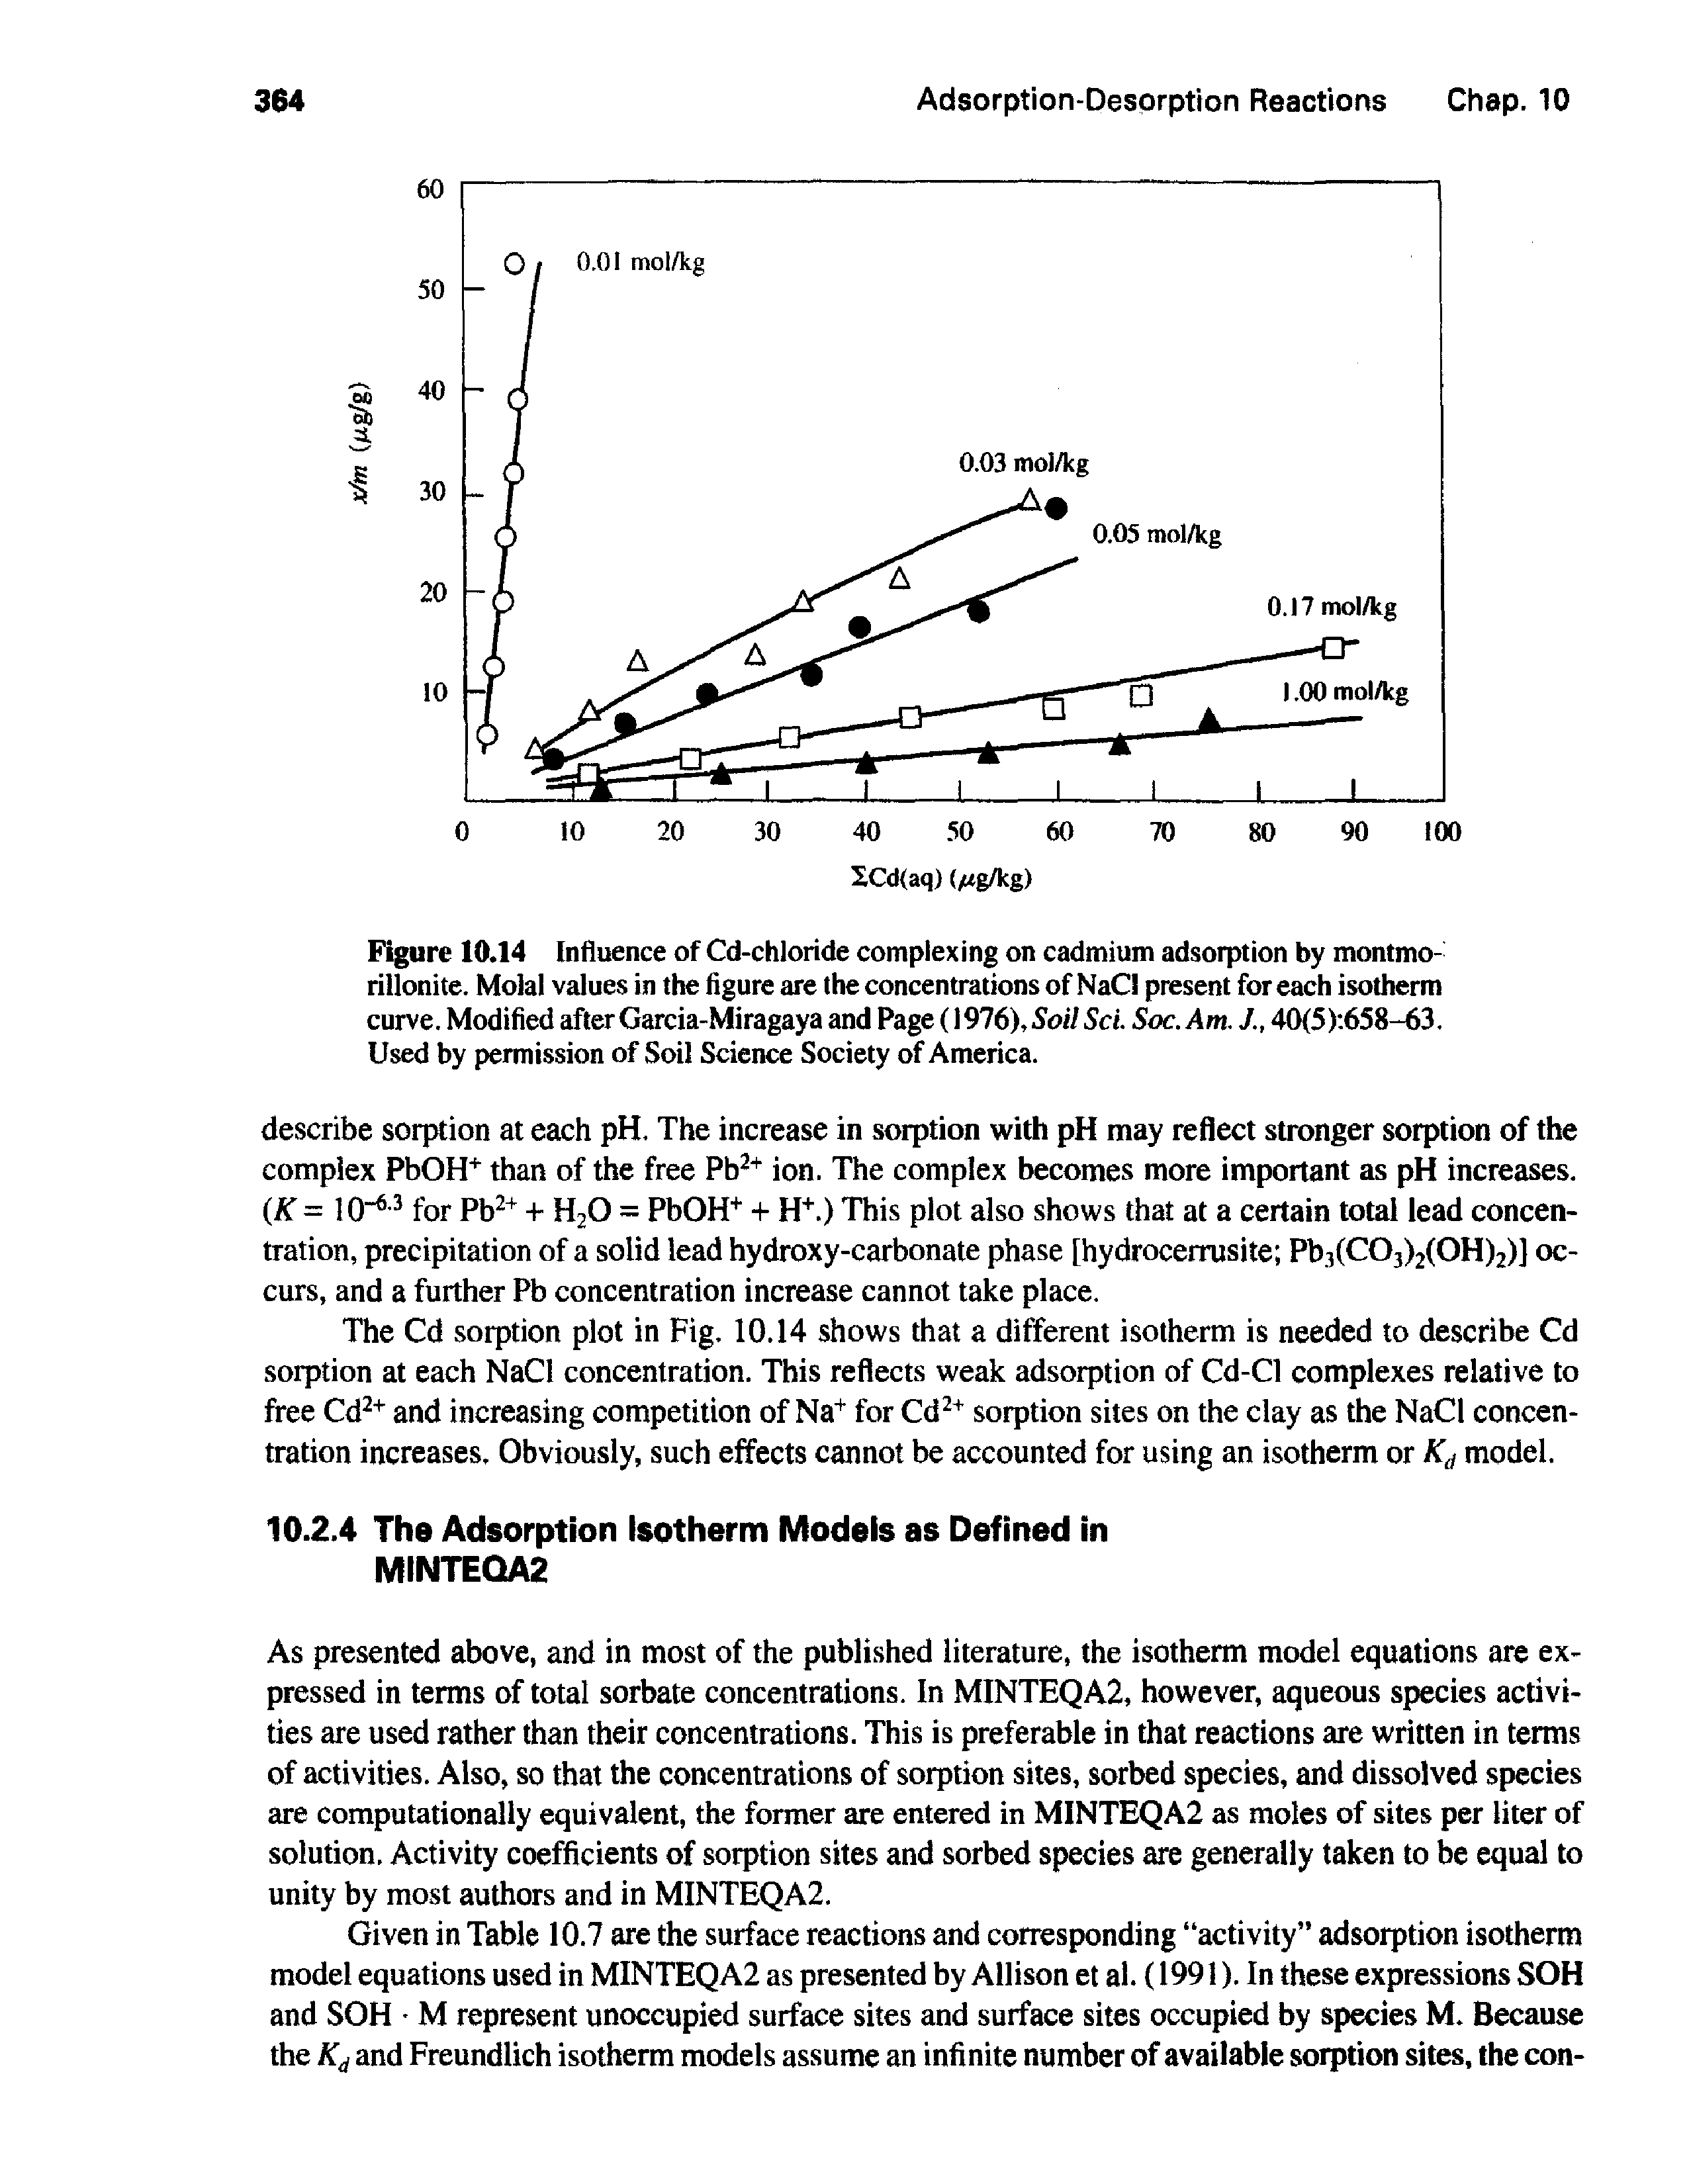 Figure 10.14 Influence of Cd-chloride complex ing on cadmium adsorption by montmo-rillonite. Molal values in the figure are the concentrations of NaCJ present for each isotherm curve. Modified after Garcia-Miragaya and Page (1976),Soil Sci Soc. Am. J., 40(5) 658-63.